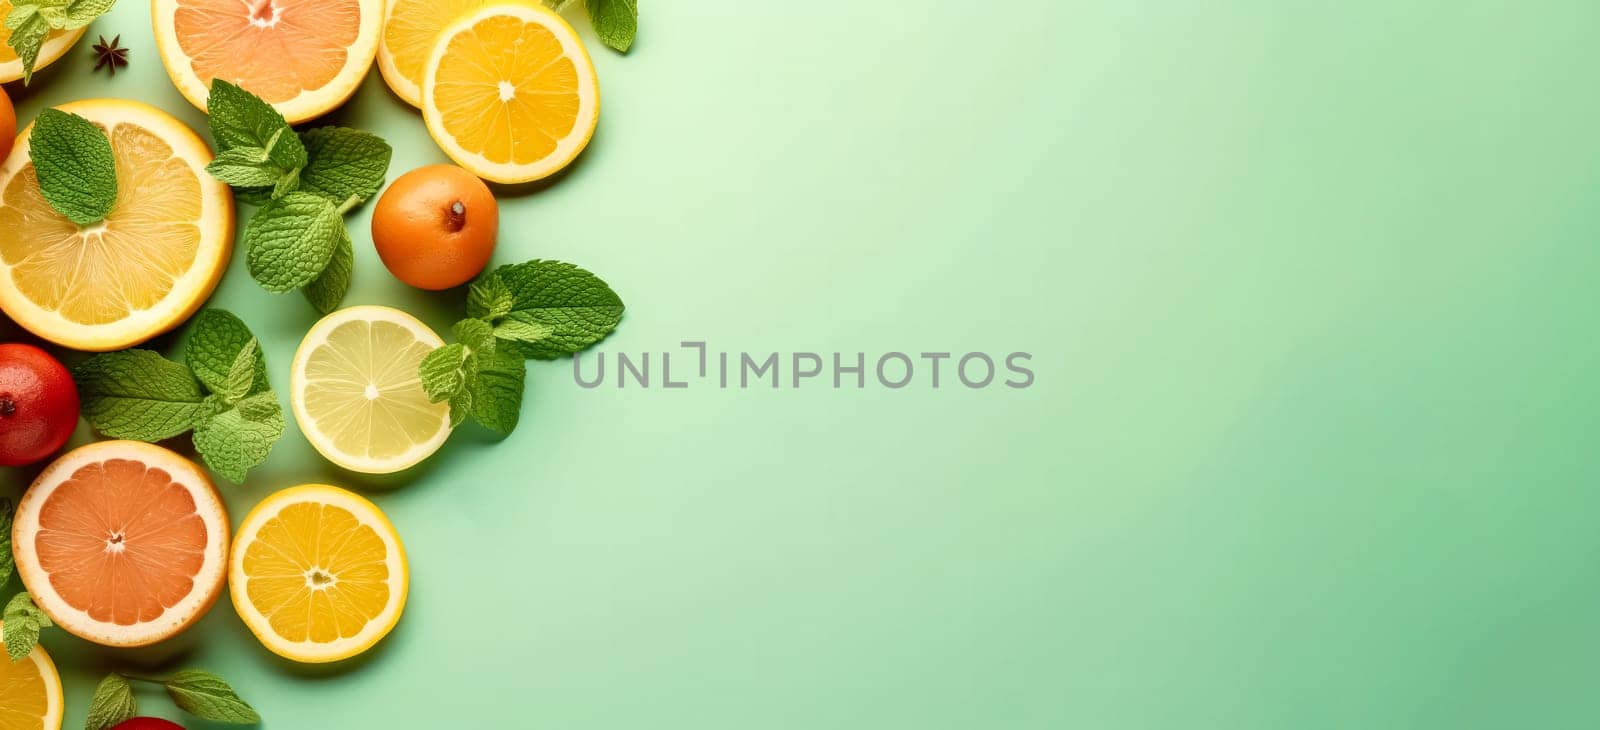 A green background with a variety of citrus fruits including oranges by Alla_Morozova93